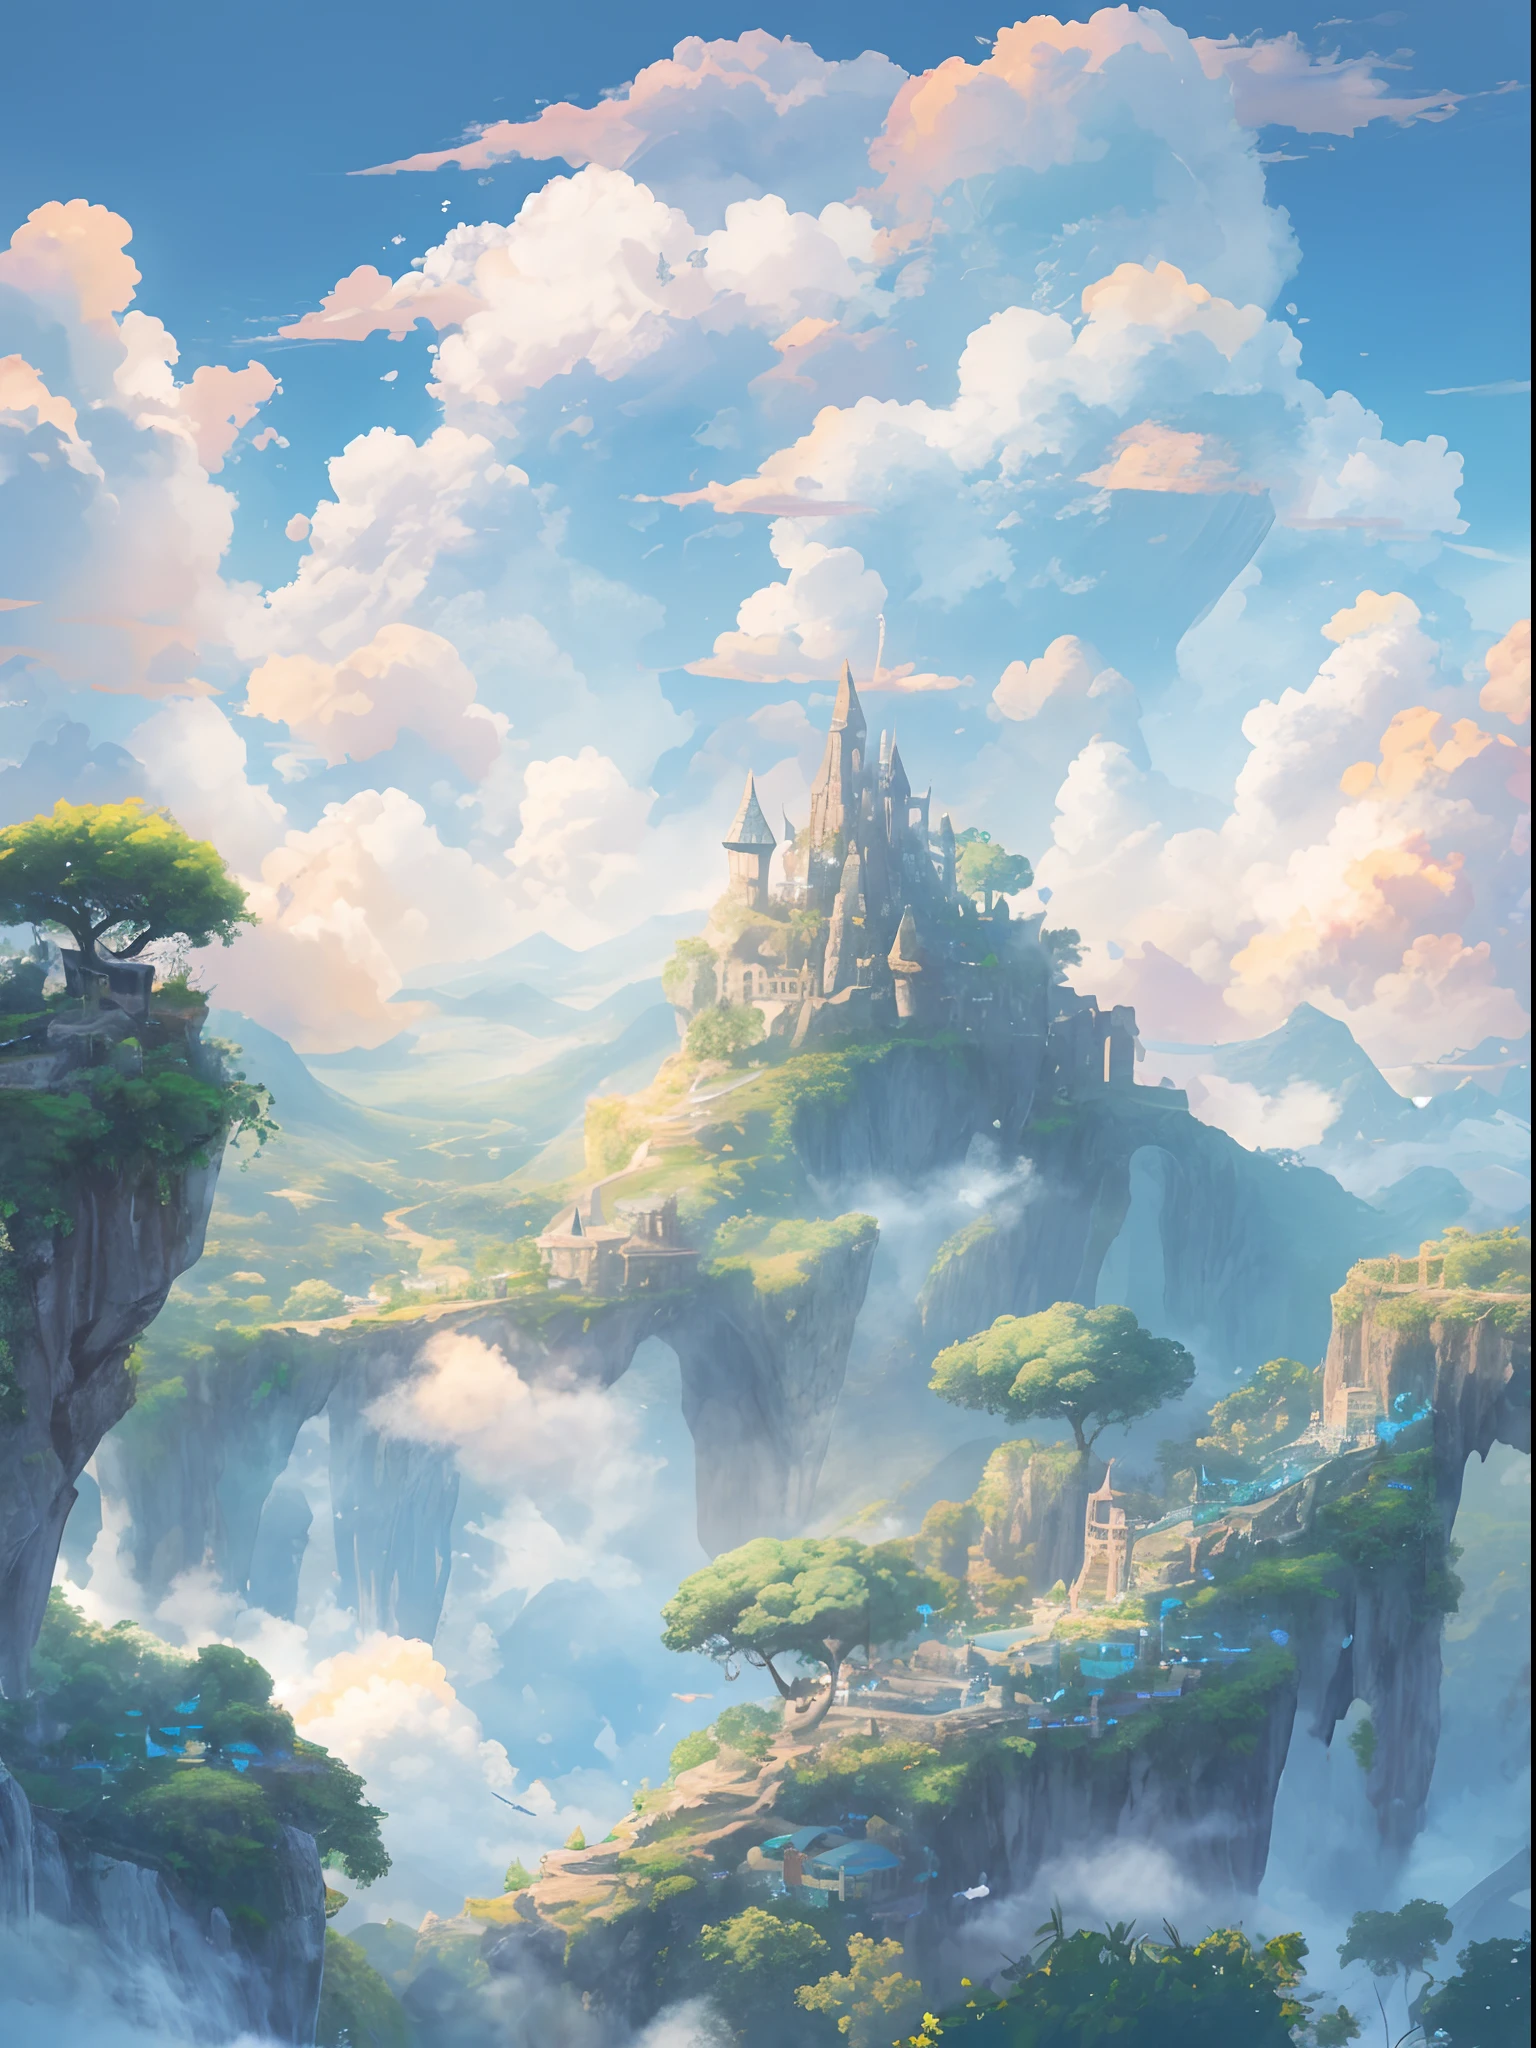 In a dreamlike land above the clouds, an athletic jungle stretches out before you. The sky is a pale shade of blue, and beautiful prism clouds shimmer in the light. It’s a magical place, full of adventure and excitement.